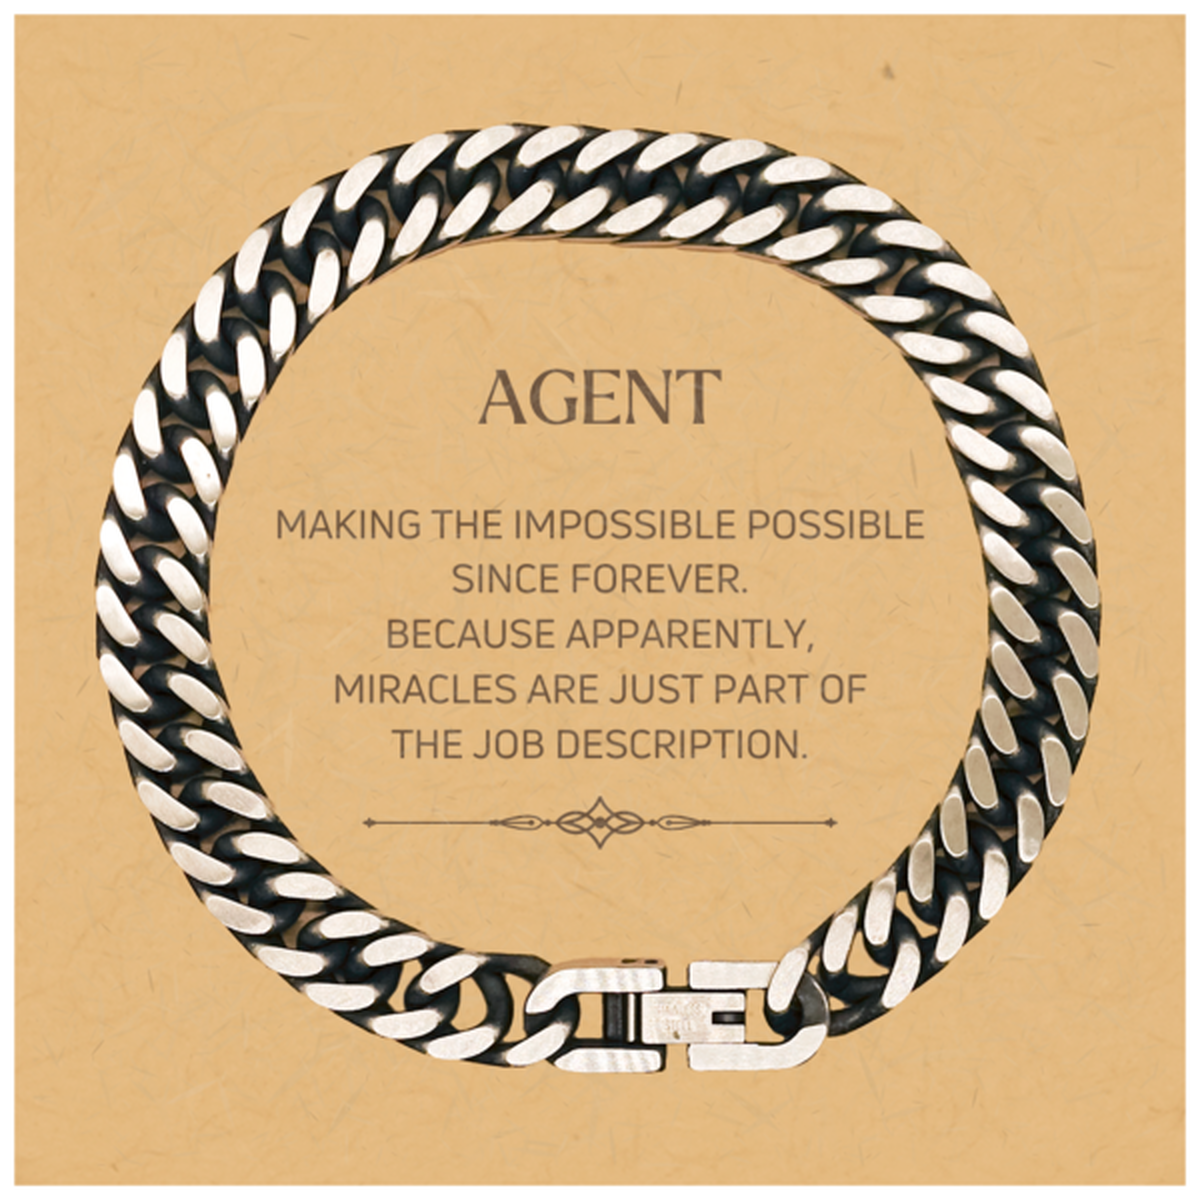 Funny Agent Gifts, Miracles are just part of the job description, Inspirational Birthday Christmas Cuban Link Chain Bracelet For Agent, Men, Women, Coworkers, Friends, Boss